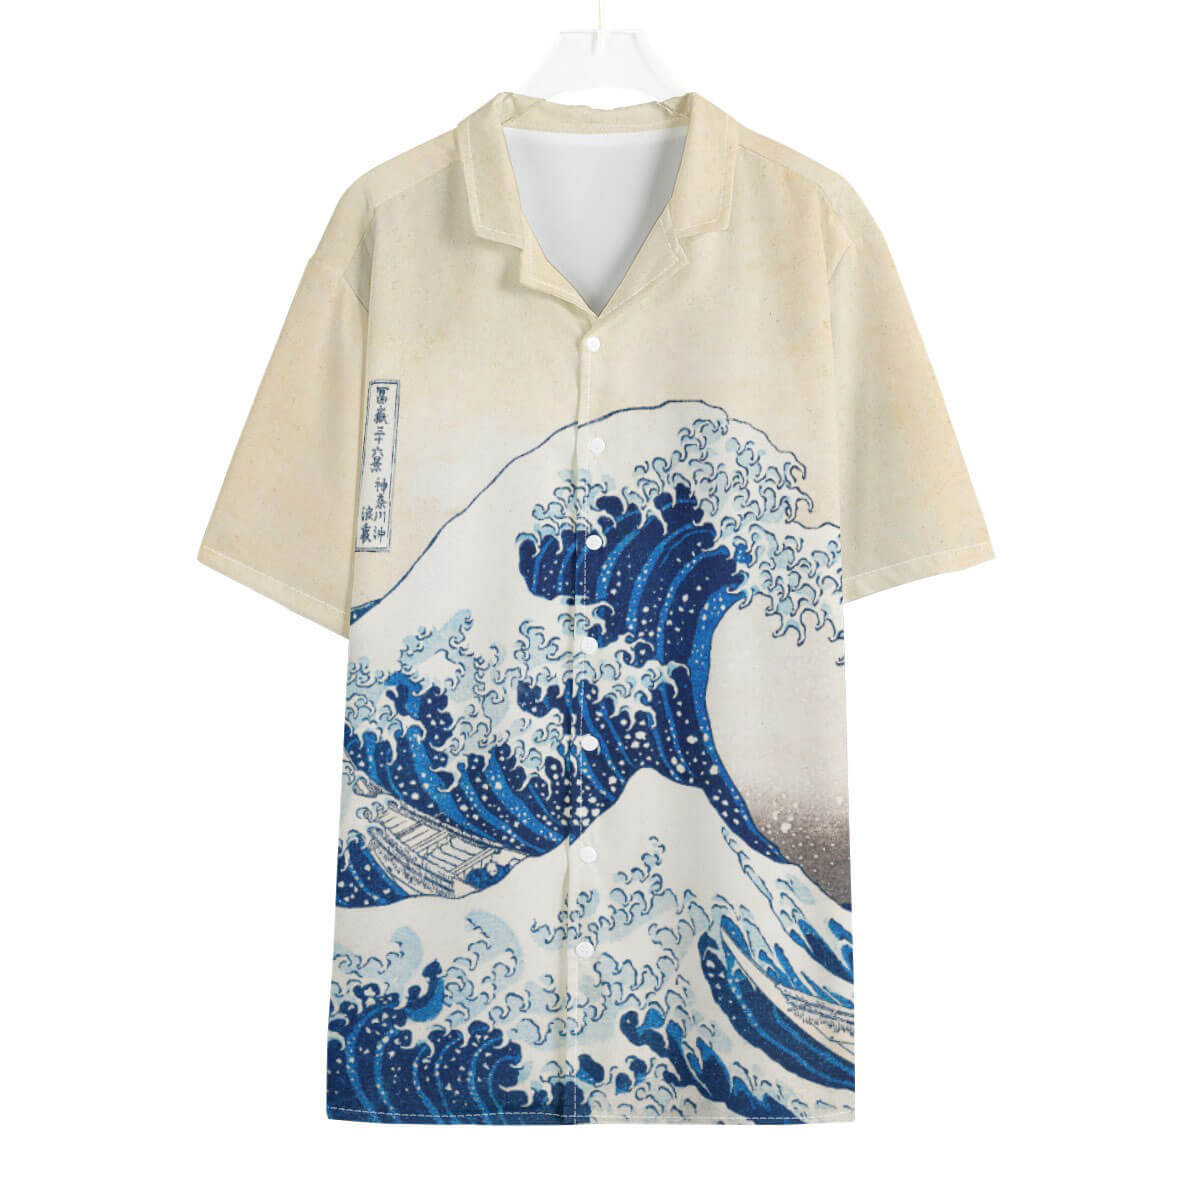 The Great Wave Hokusai shirt front view showing full artwork